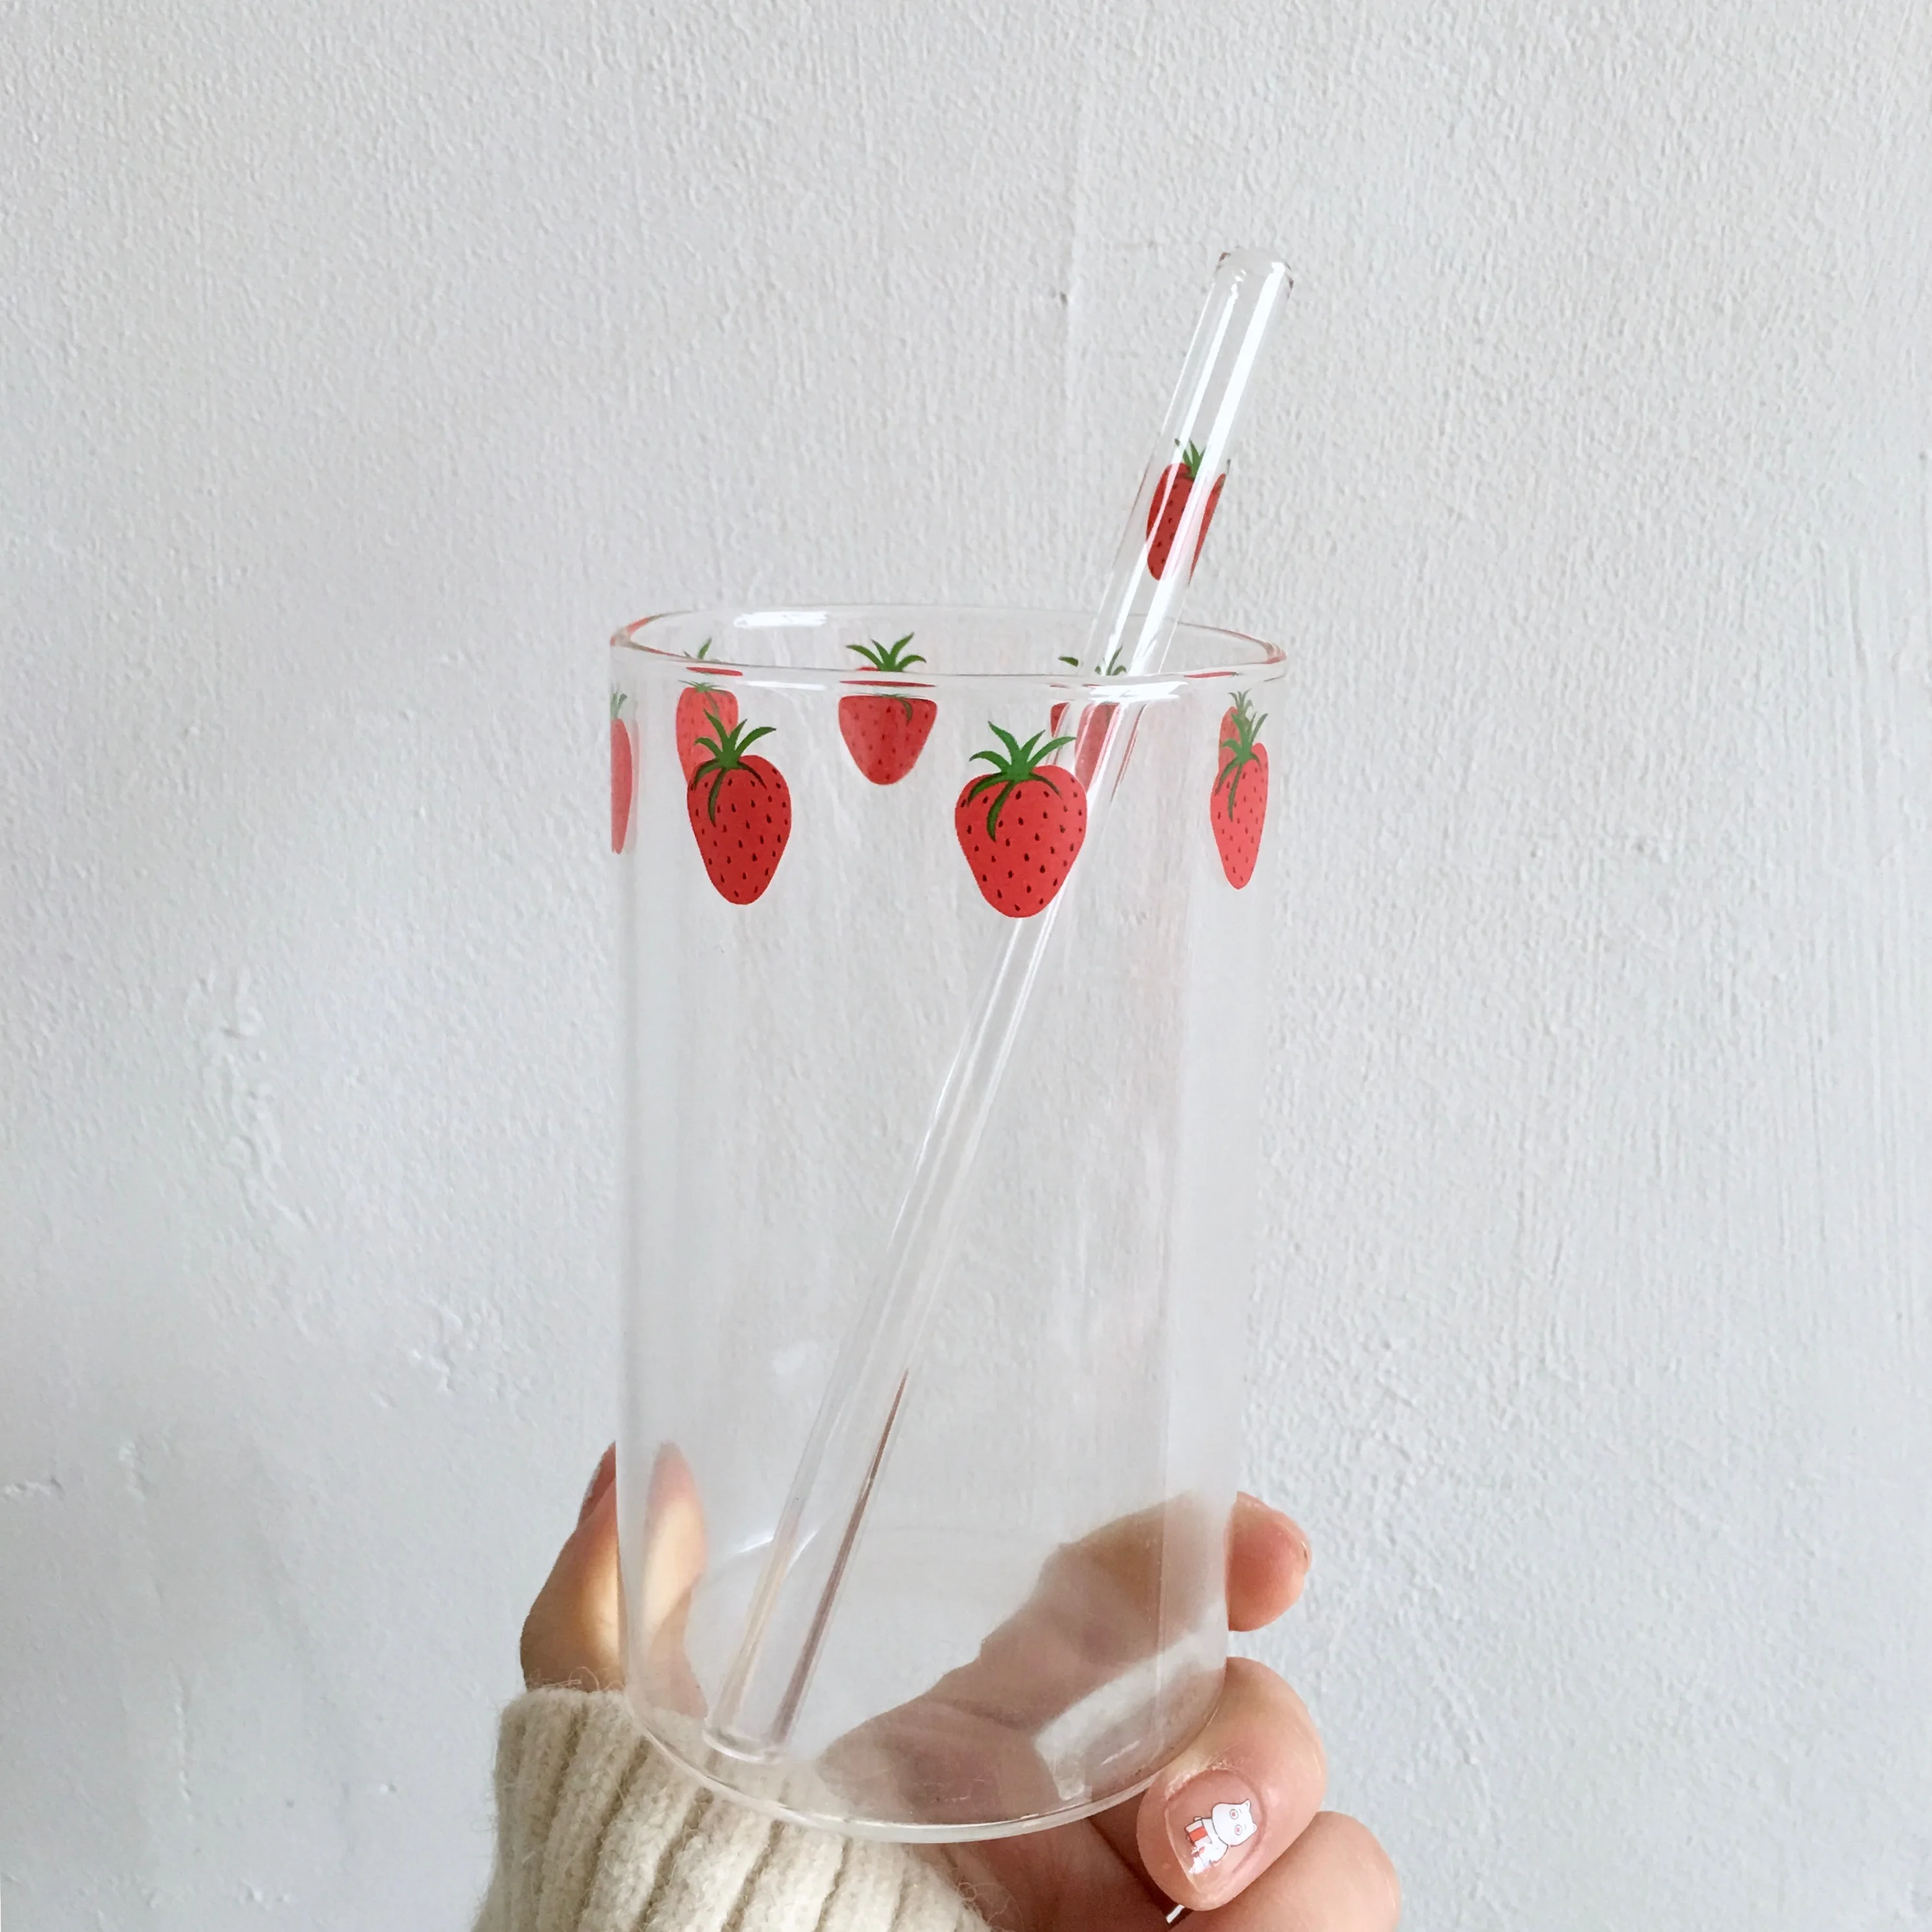 https://ae01.alicdn.com/kf/H2b58cd1841f845b5a3f965cc06cce763b/Strawberry-Cute-Glass-Cup-with-Straw-Creative-Strawberry-Transparent-Water-Cup-Student-Milk-Heat-Resistant-300ml.jpg